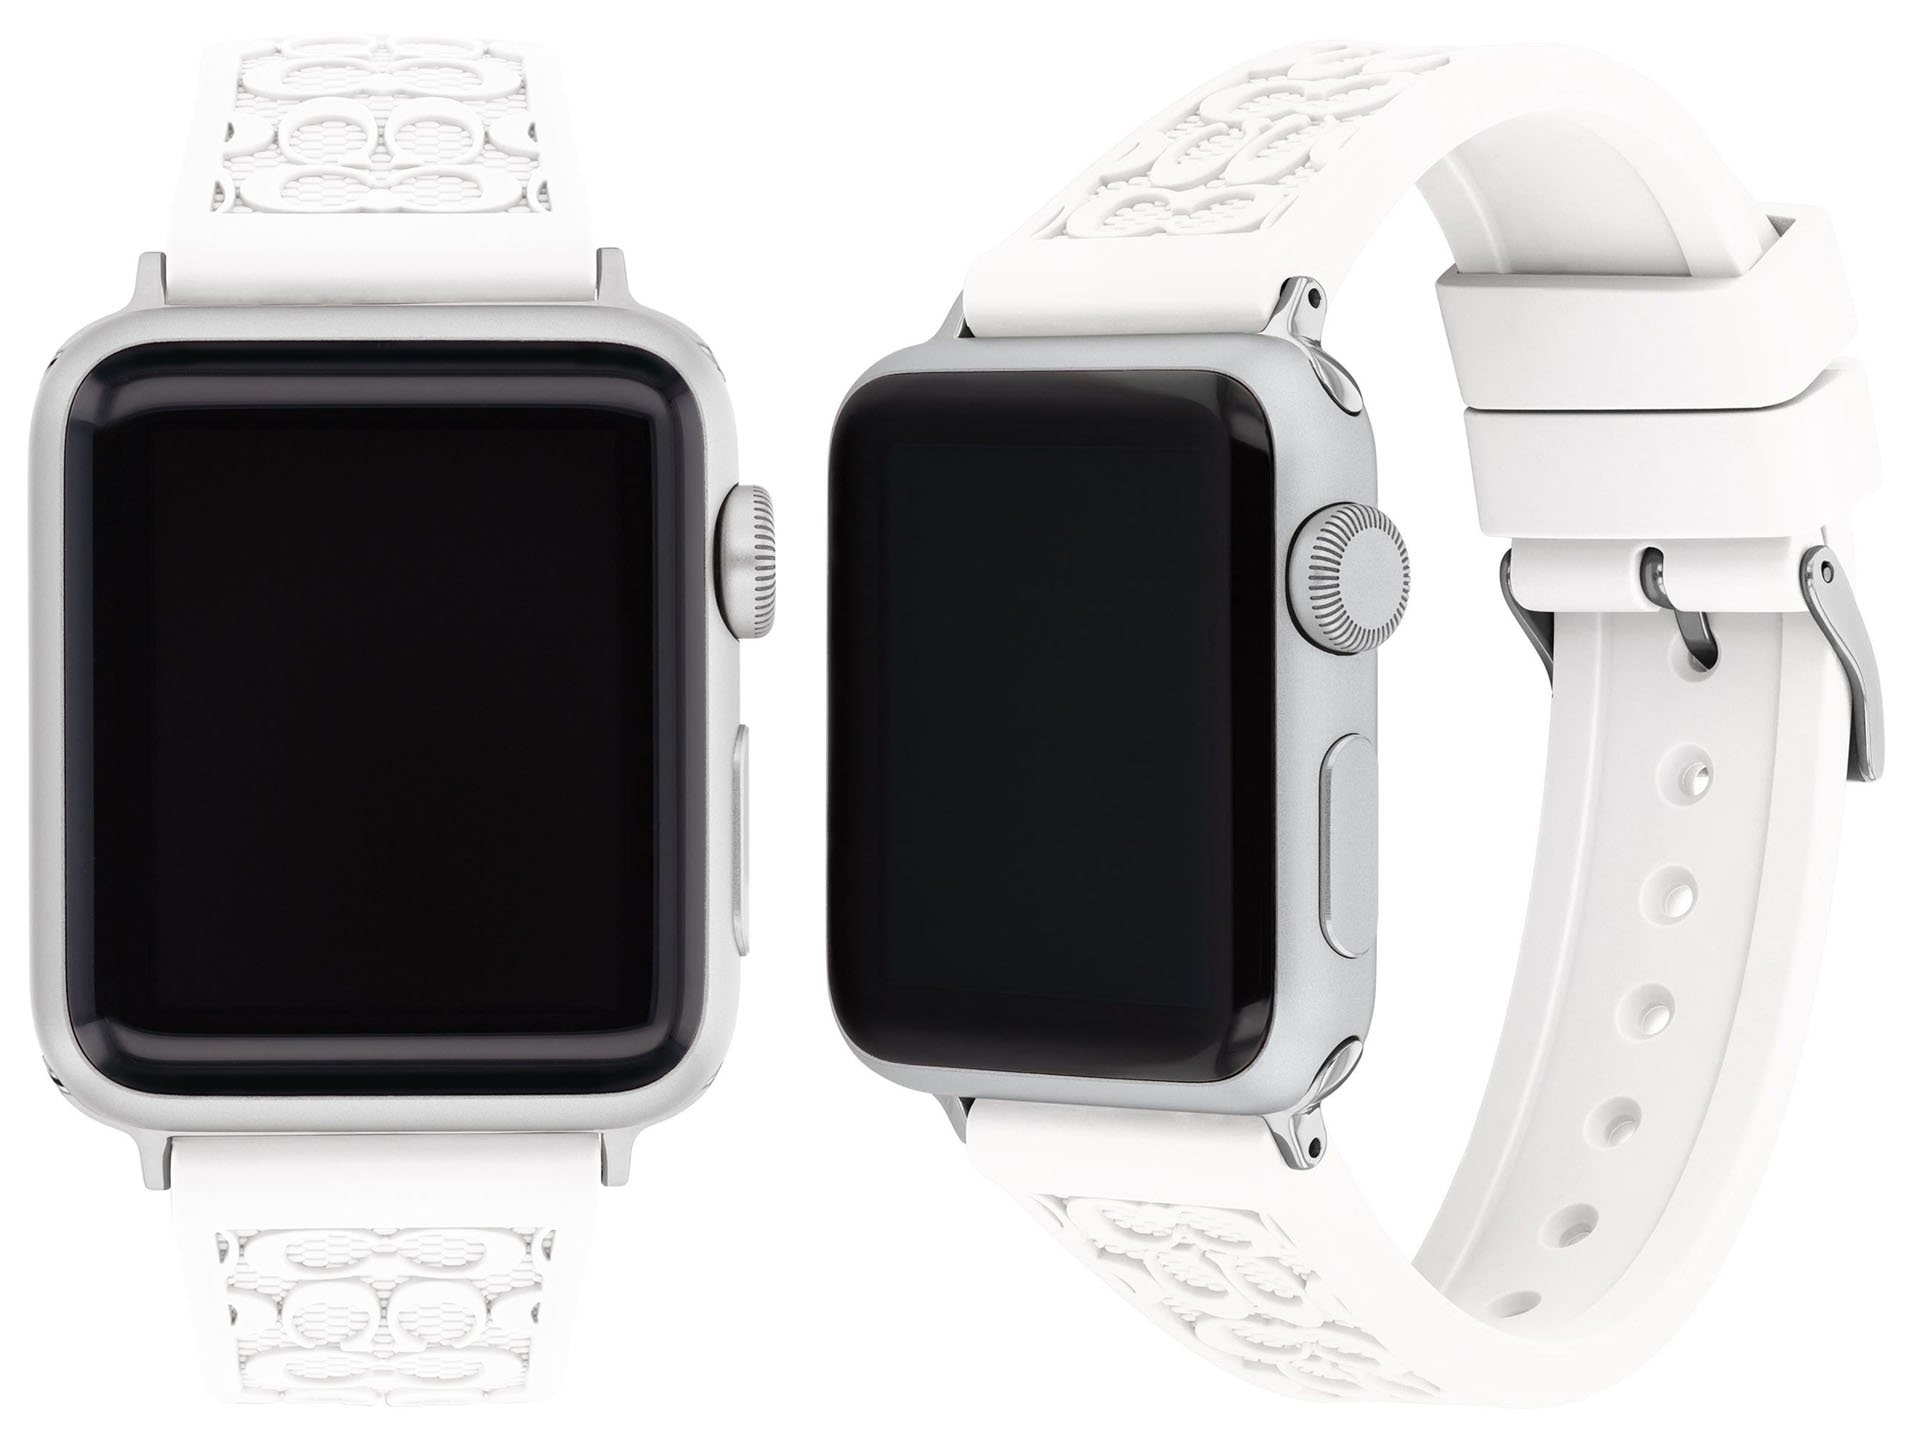 Sleek yet sporty, this Coach Apple Watch band features iconic Cs that texture the matte silicone rubber material